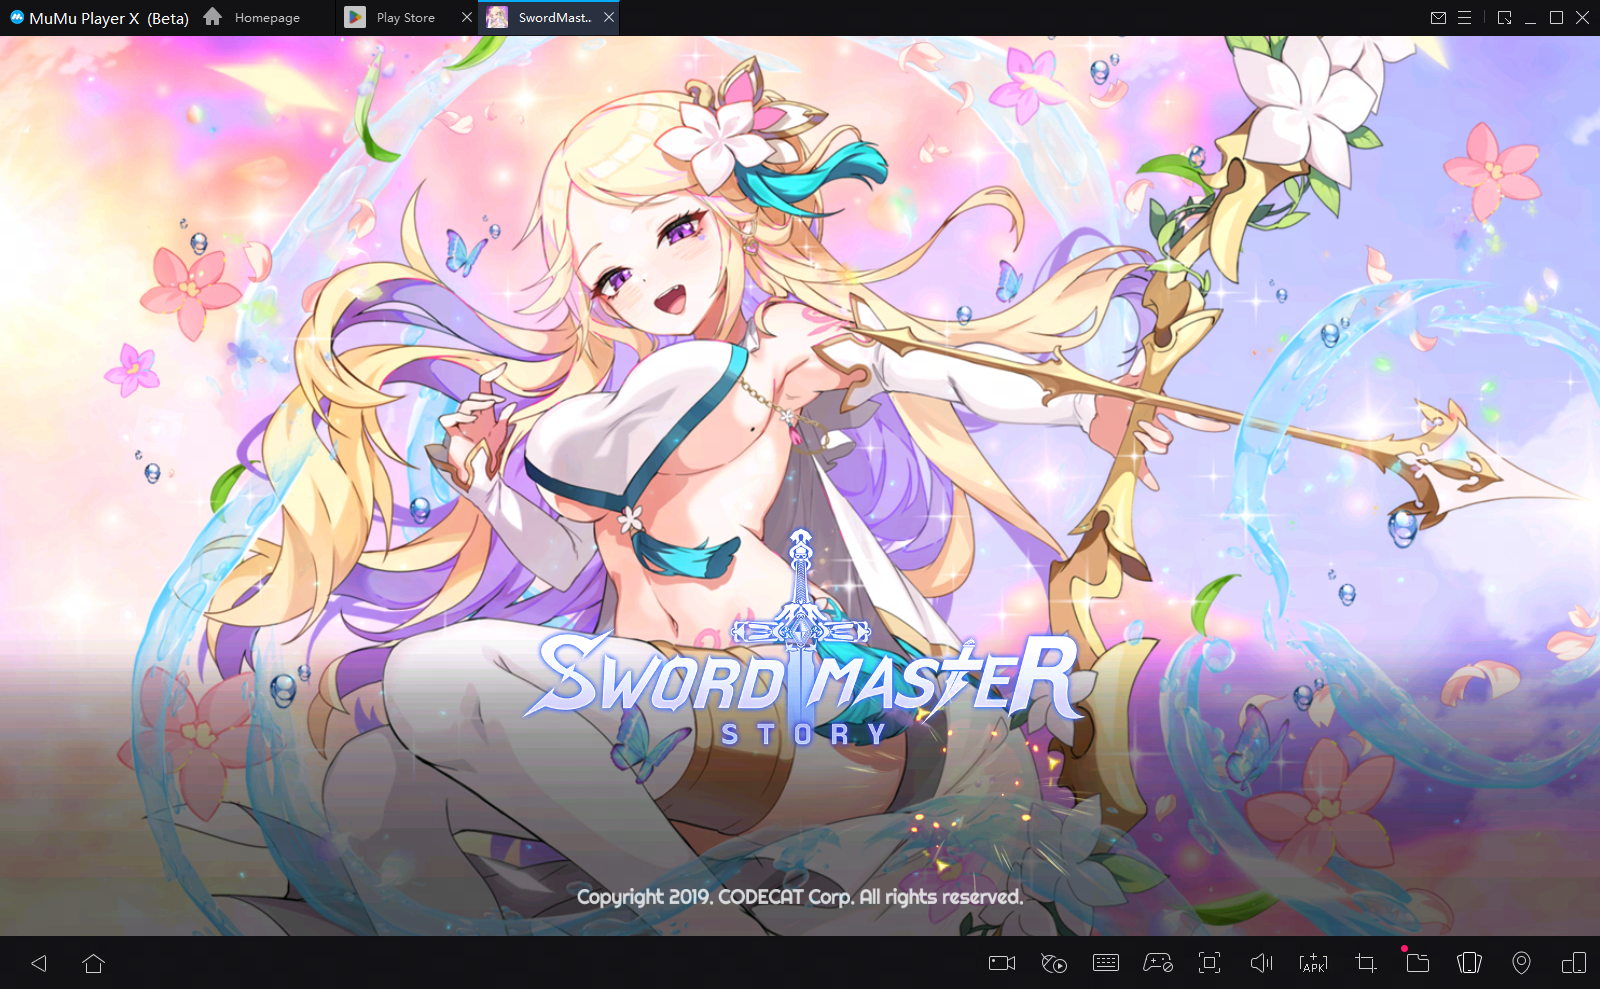 Sword Master Story free codes (October 2023) and how to redeem